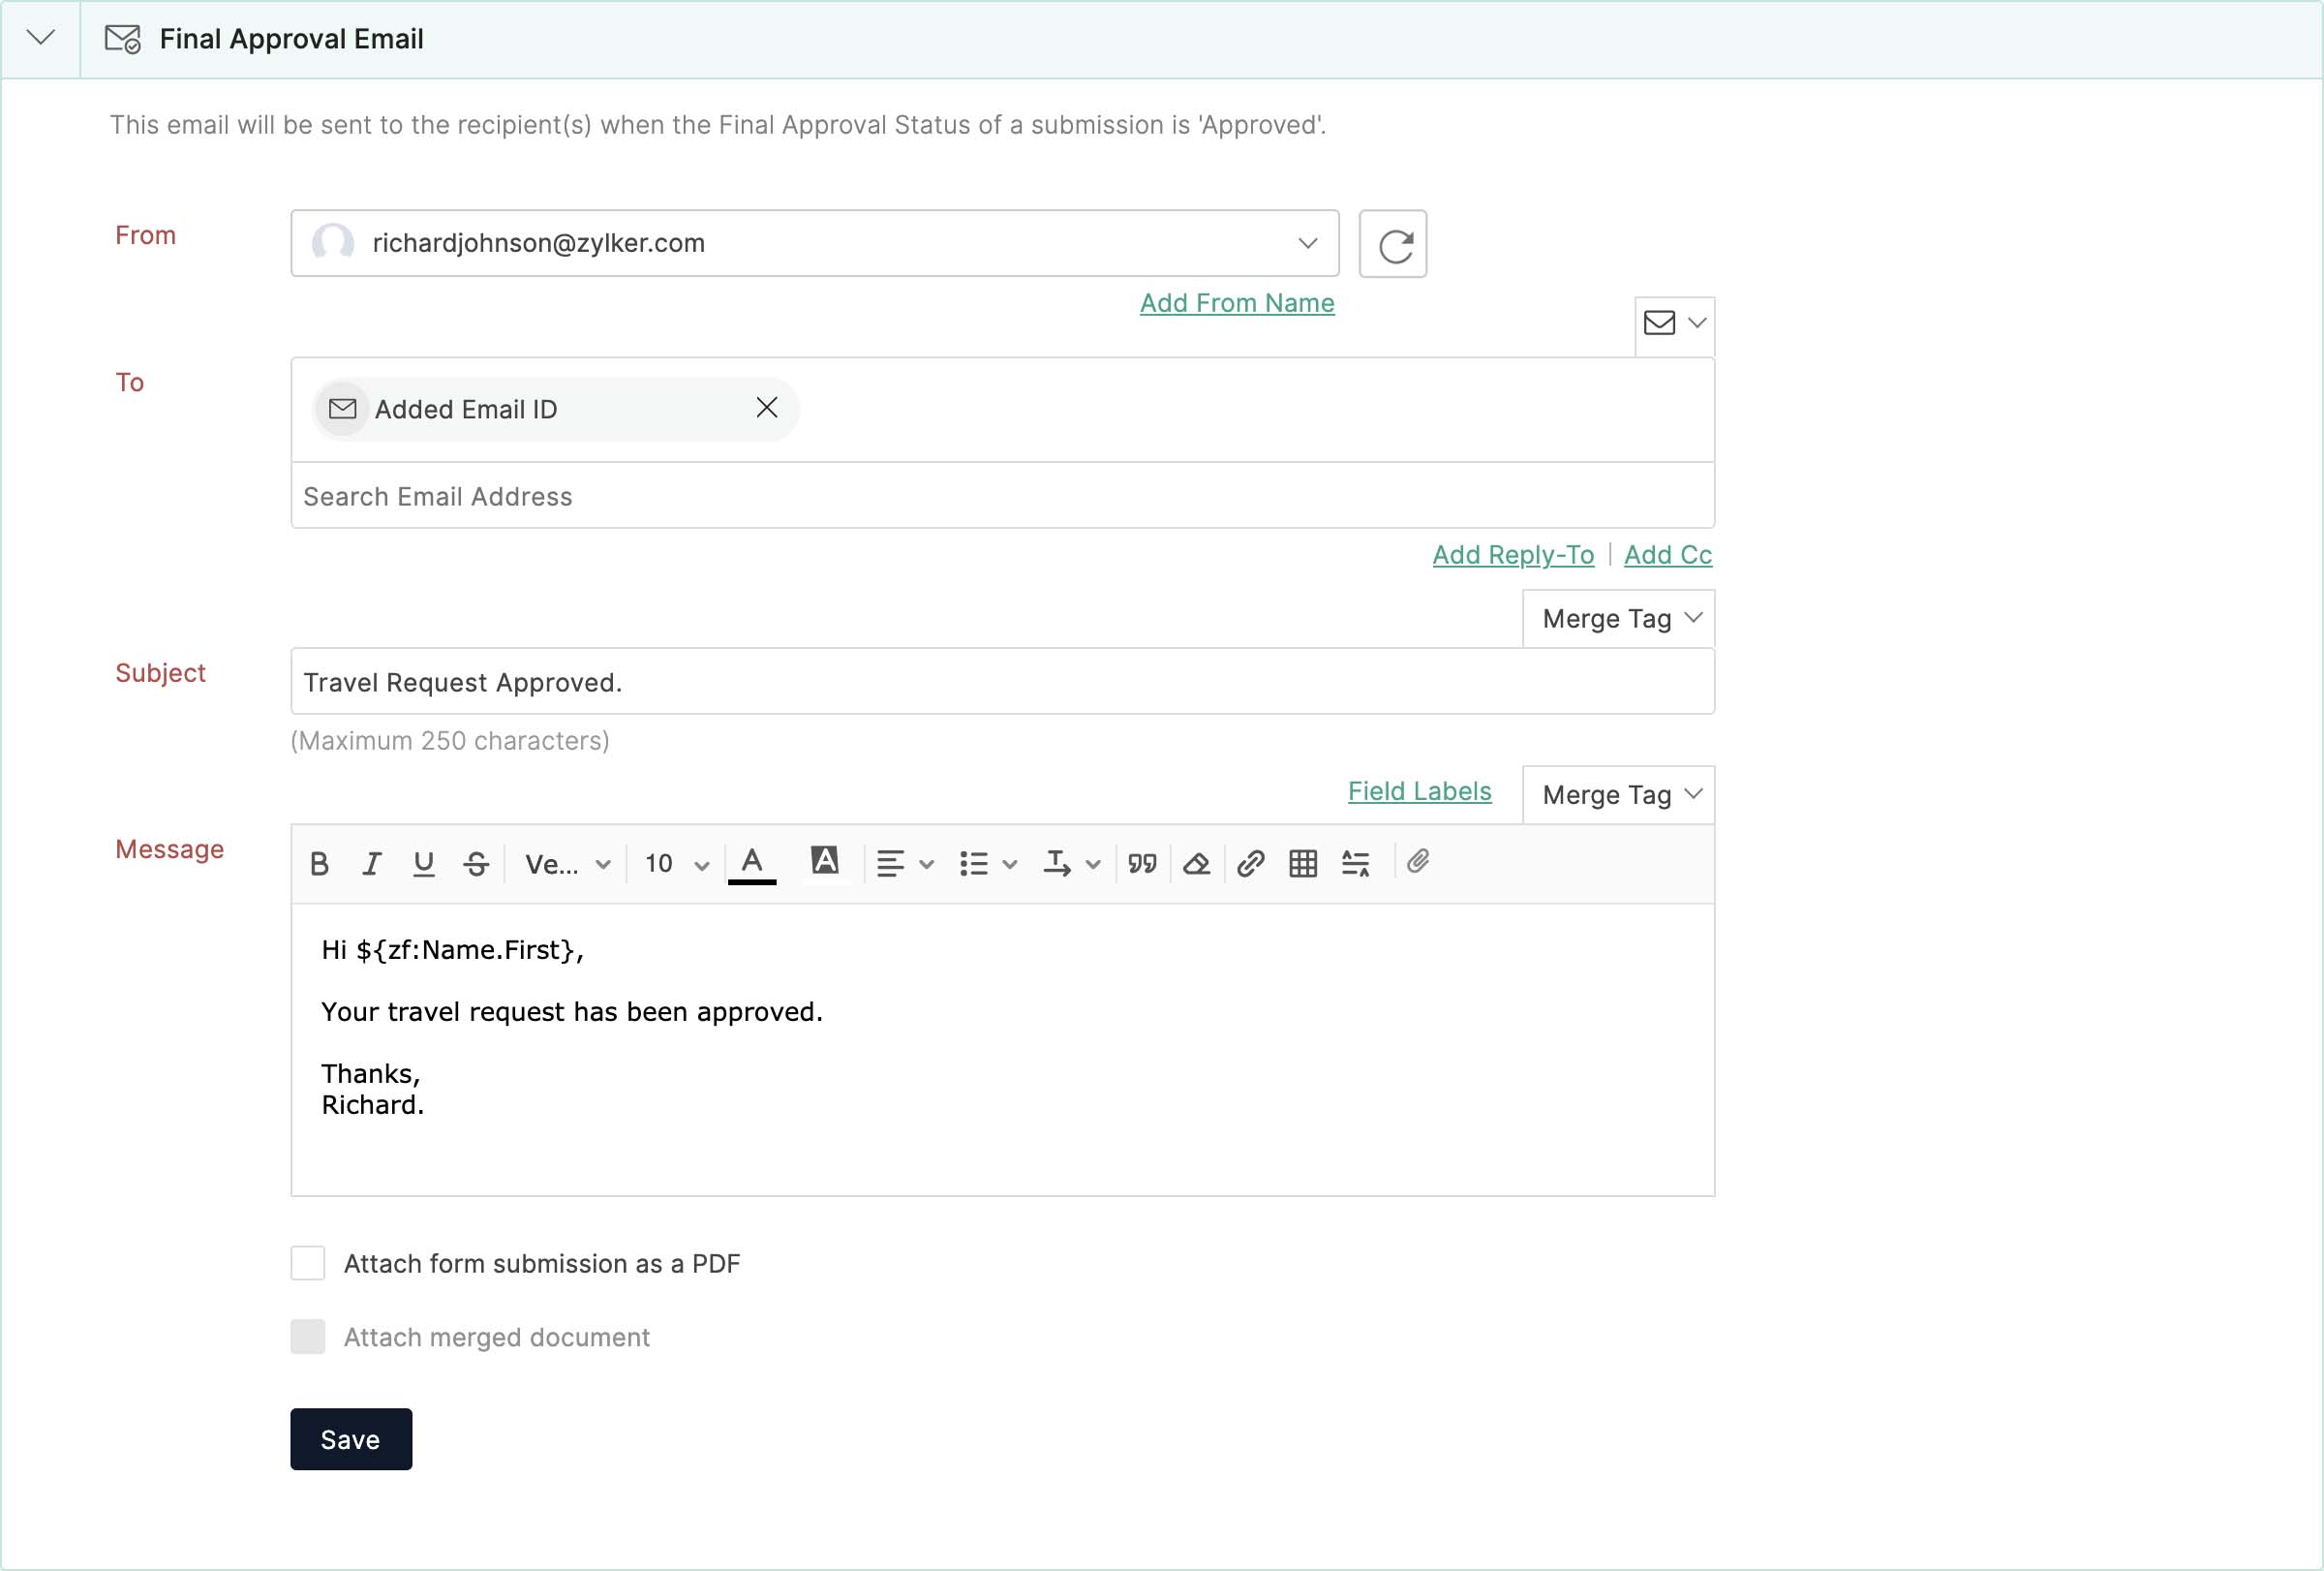 Final Approval Email configuration